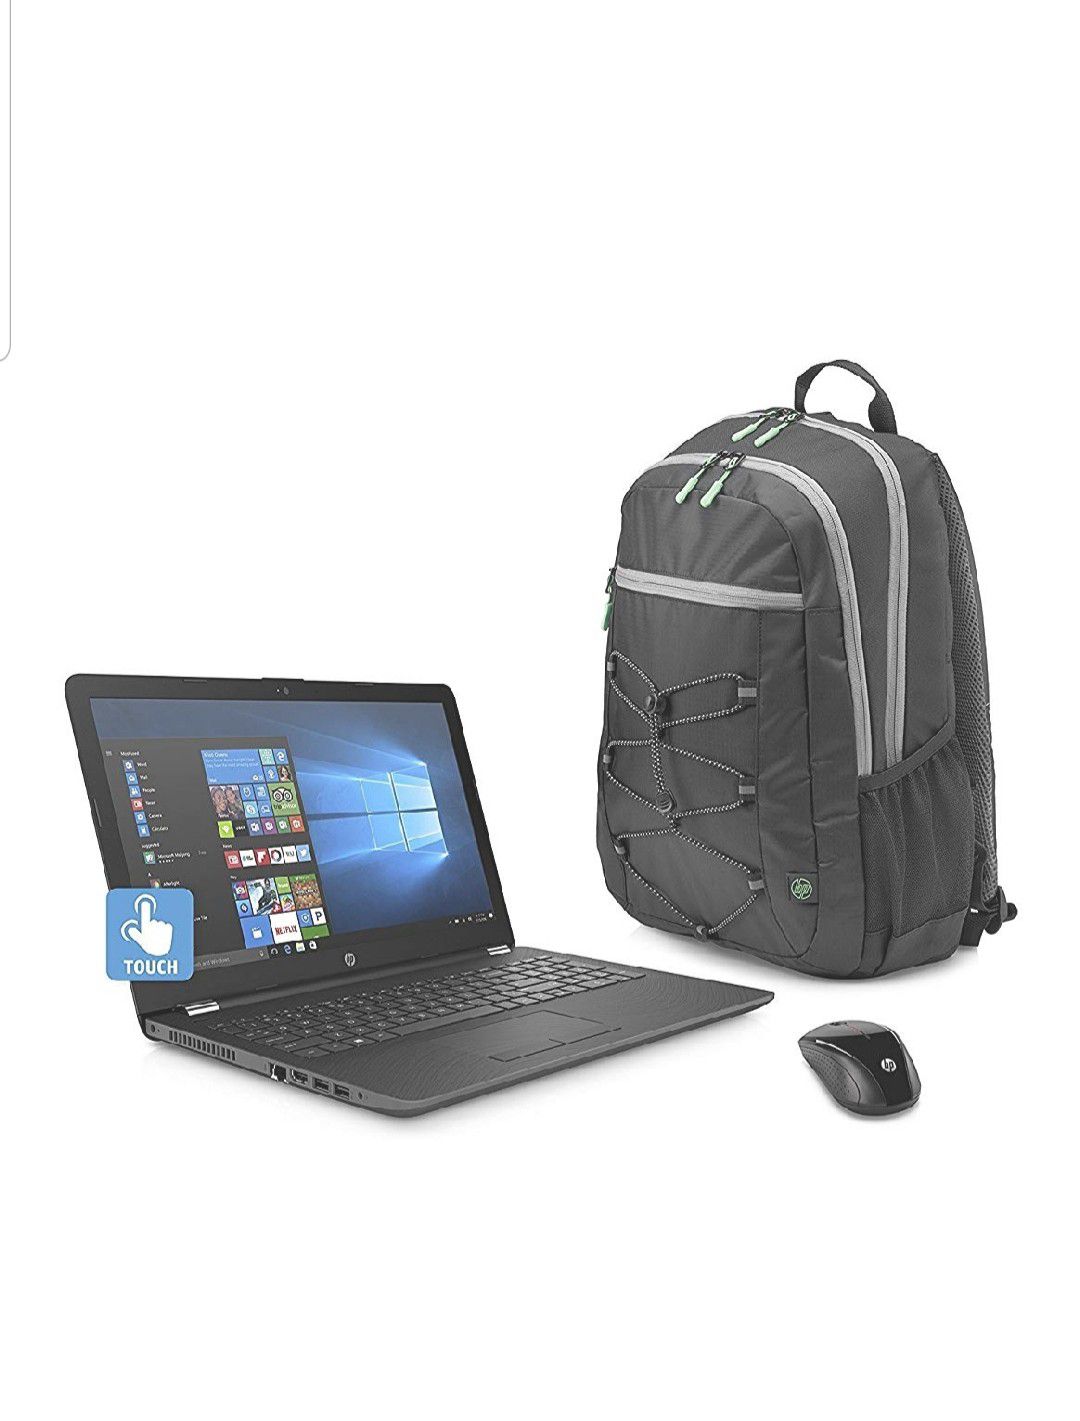 Brand new in packaging HP laptop with backpack and wireless mouse